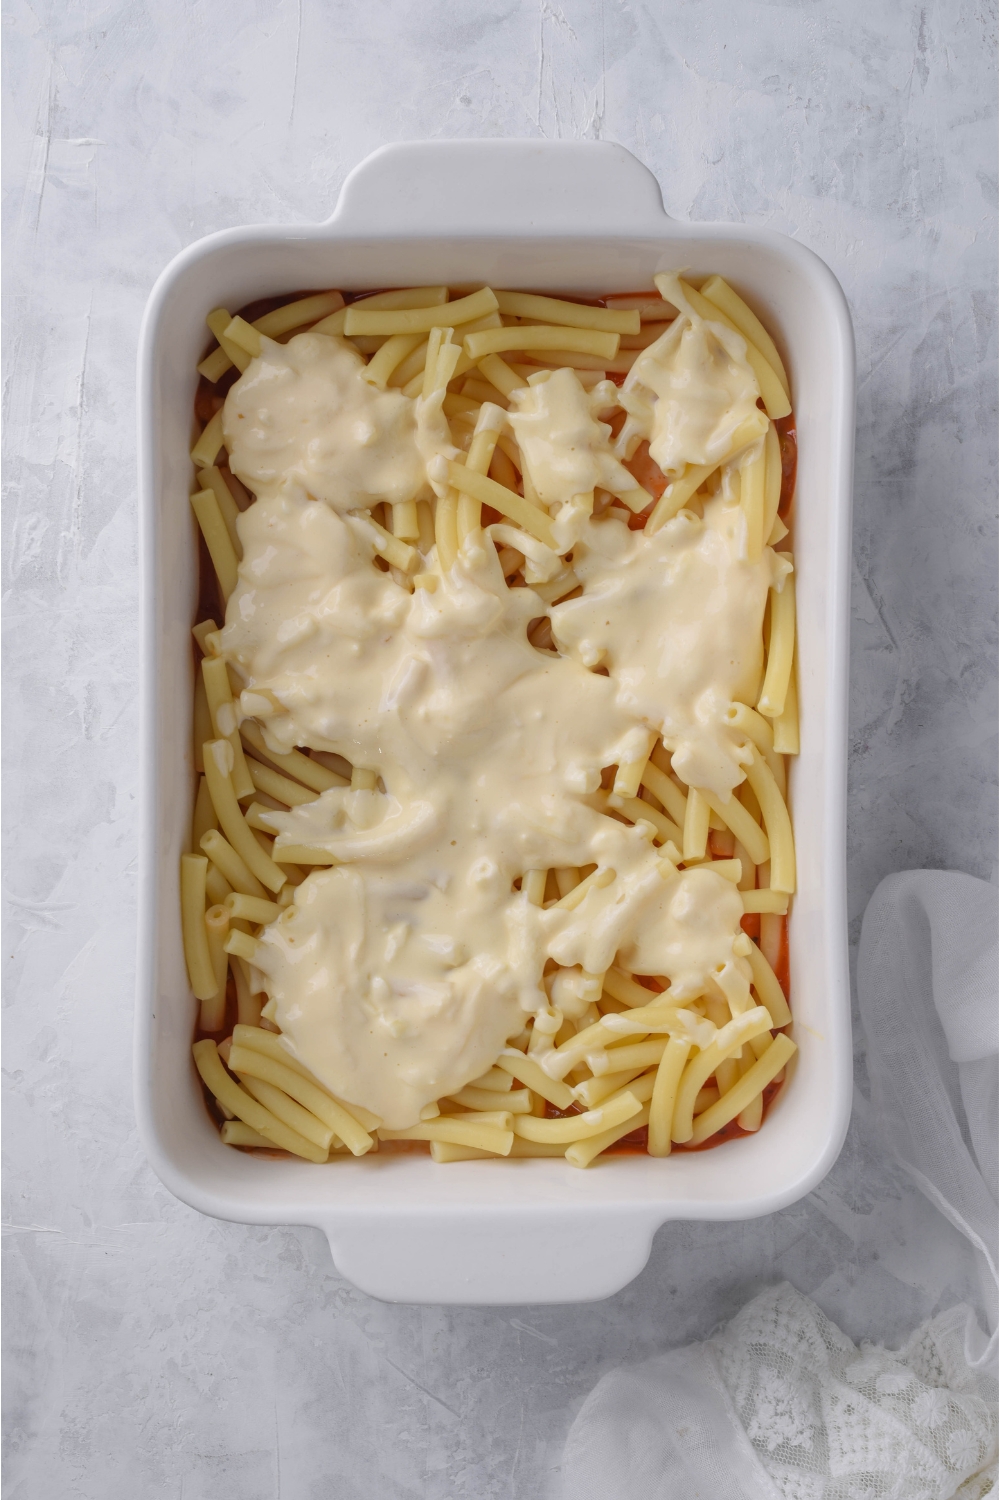 A white casserole dish filled with cooked ziti noodles and a creamy cheese sauce poured on top.